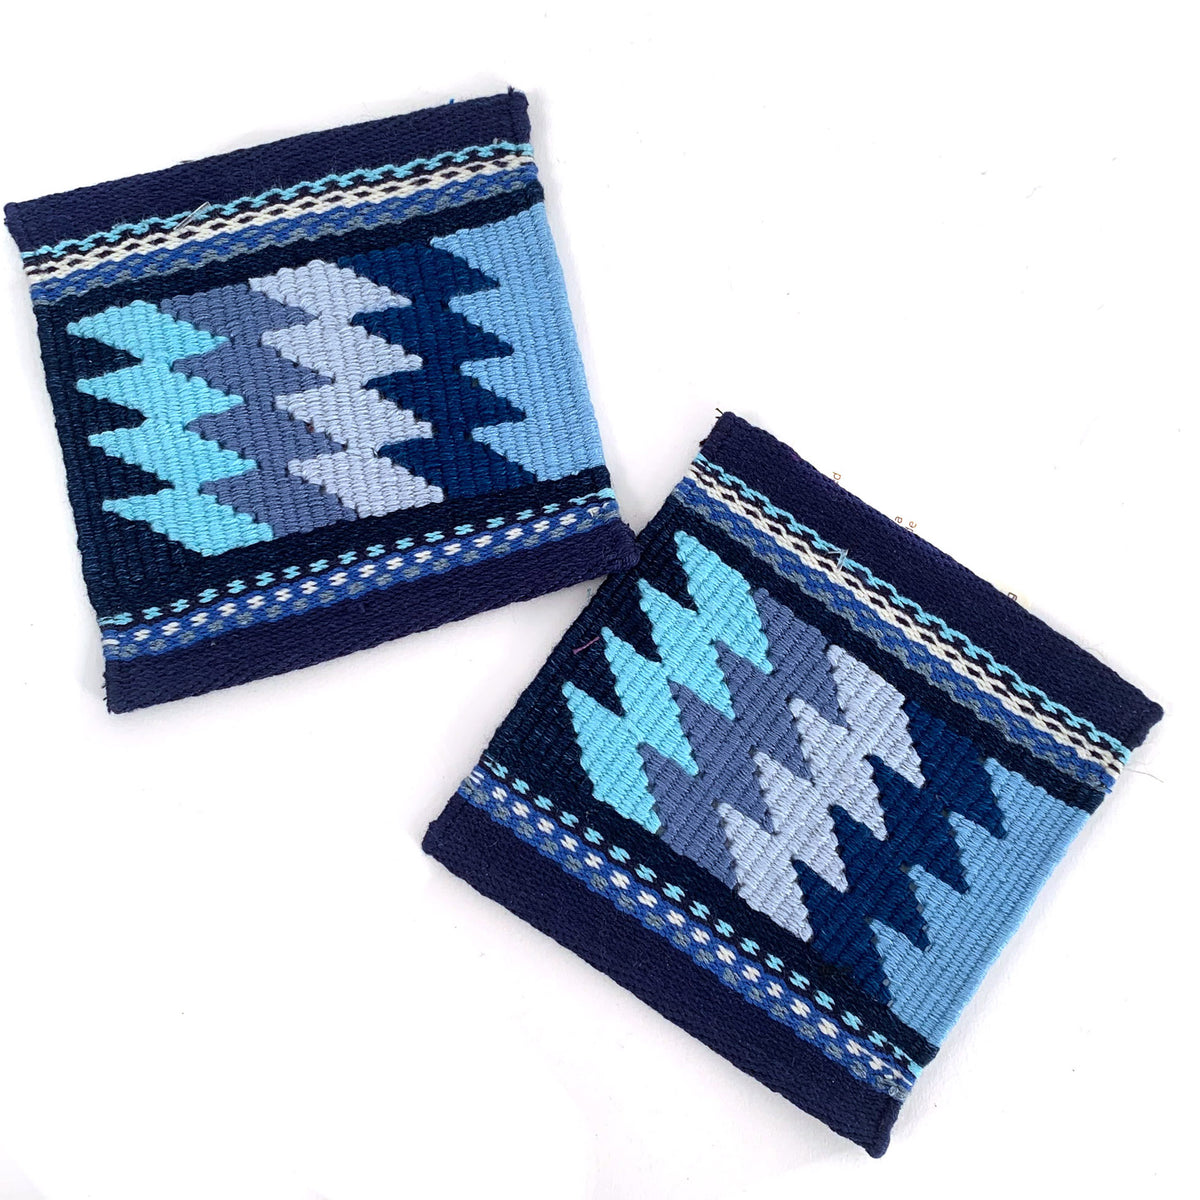 handwoven tapestry coaster - indigo and blues